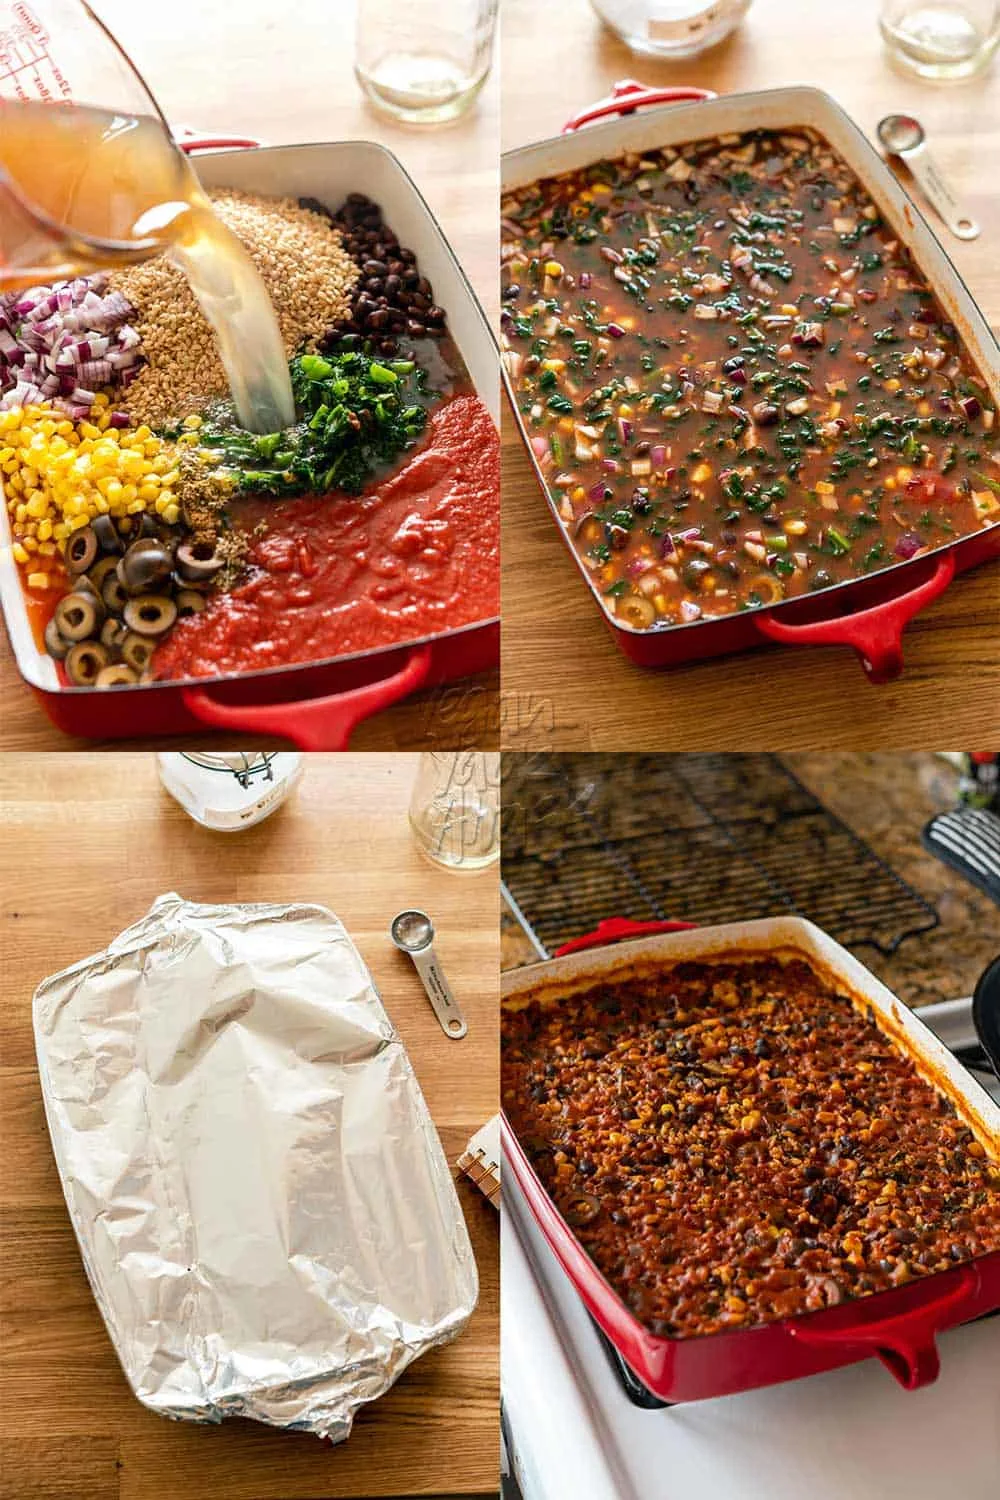 Image collage of assembly of rice bake in a red casserole dish